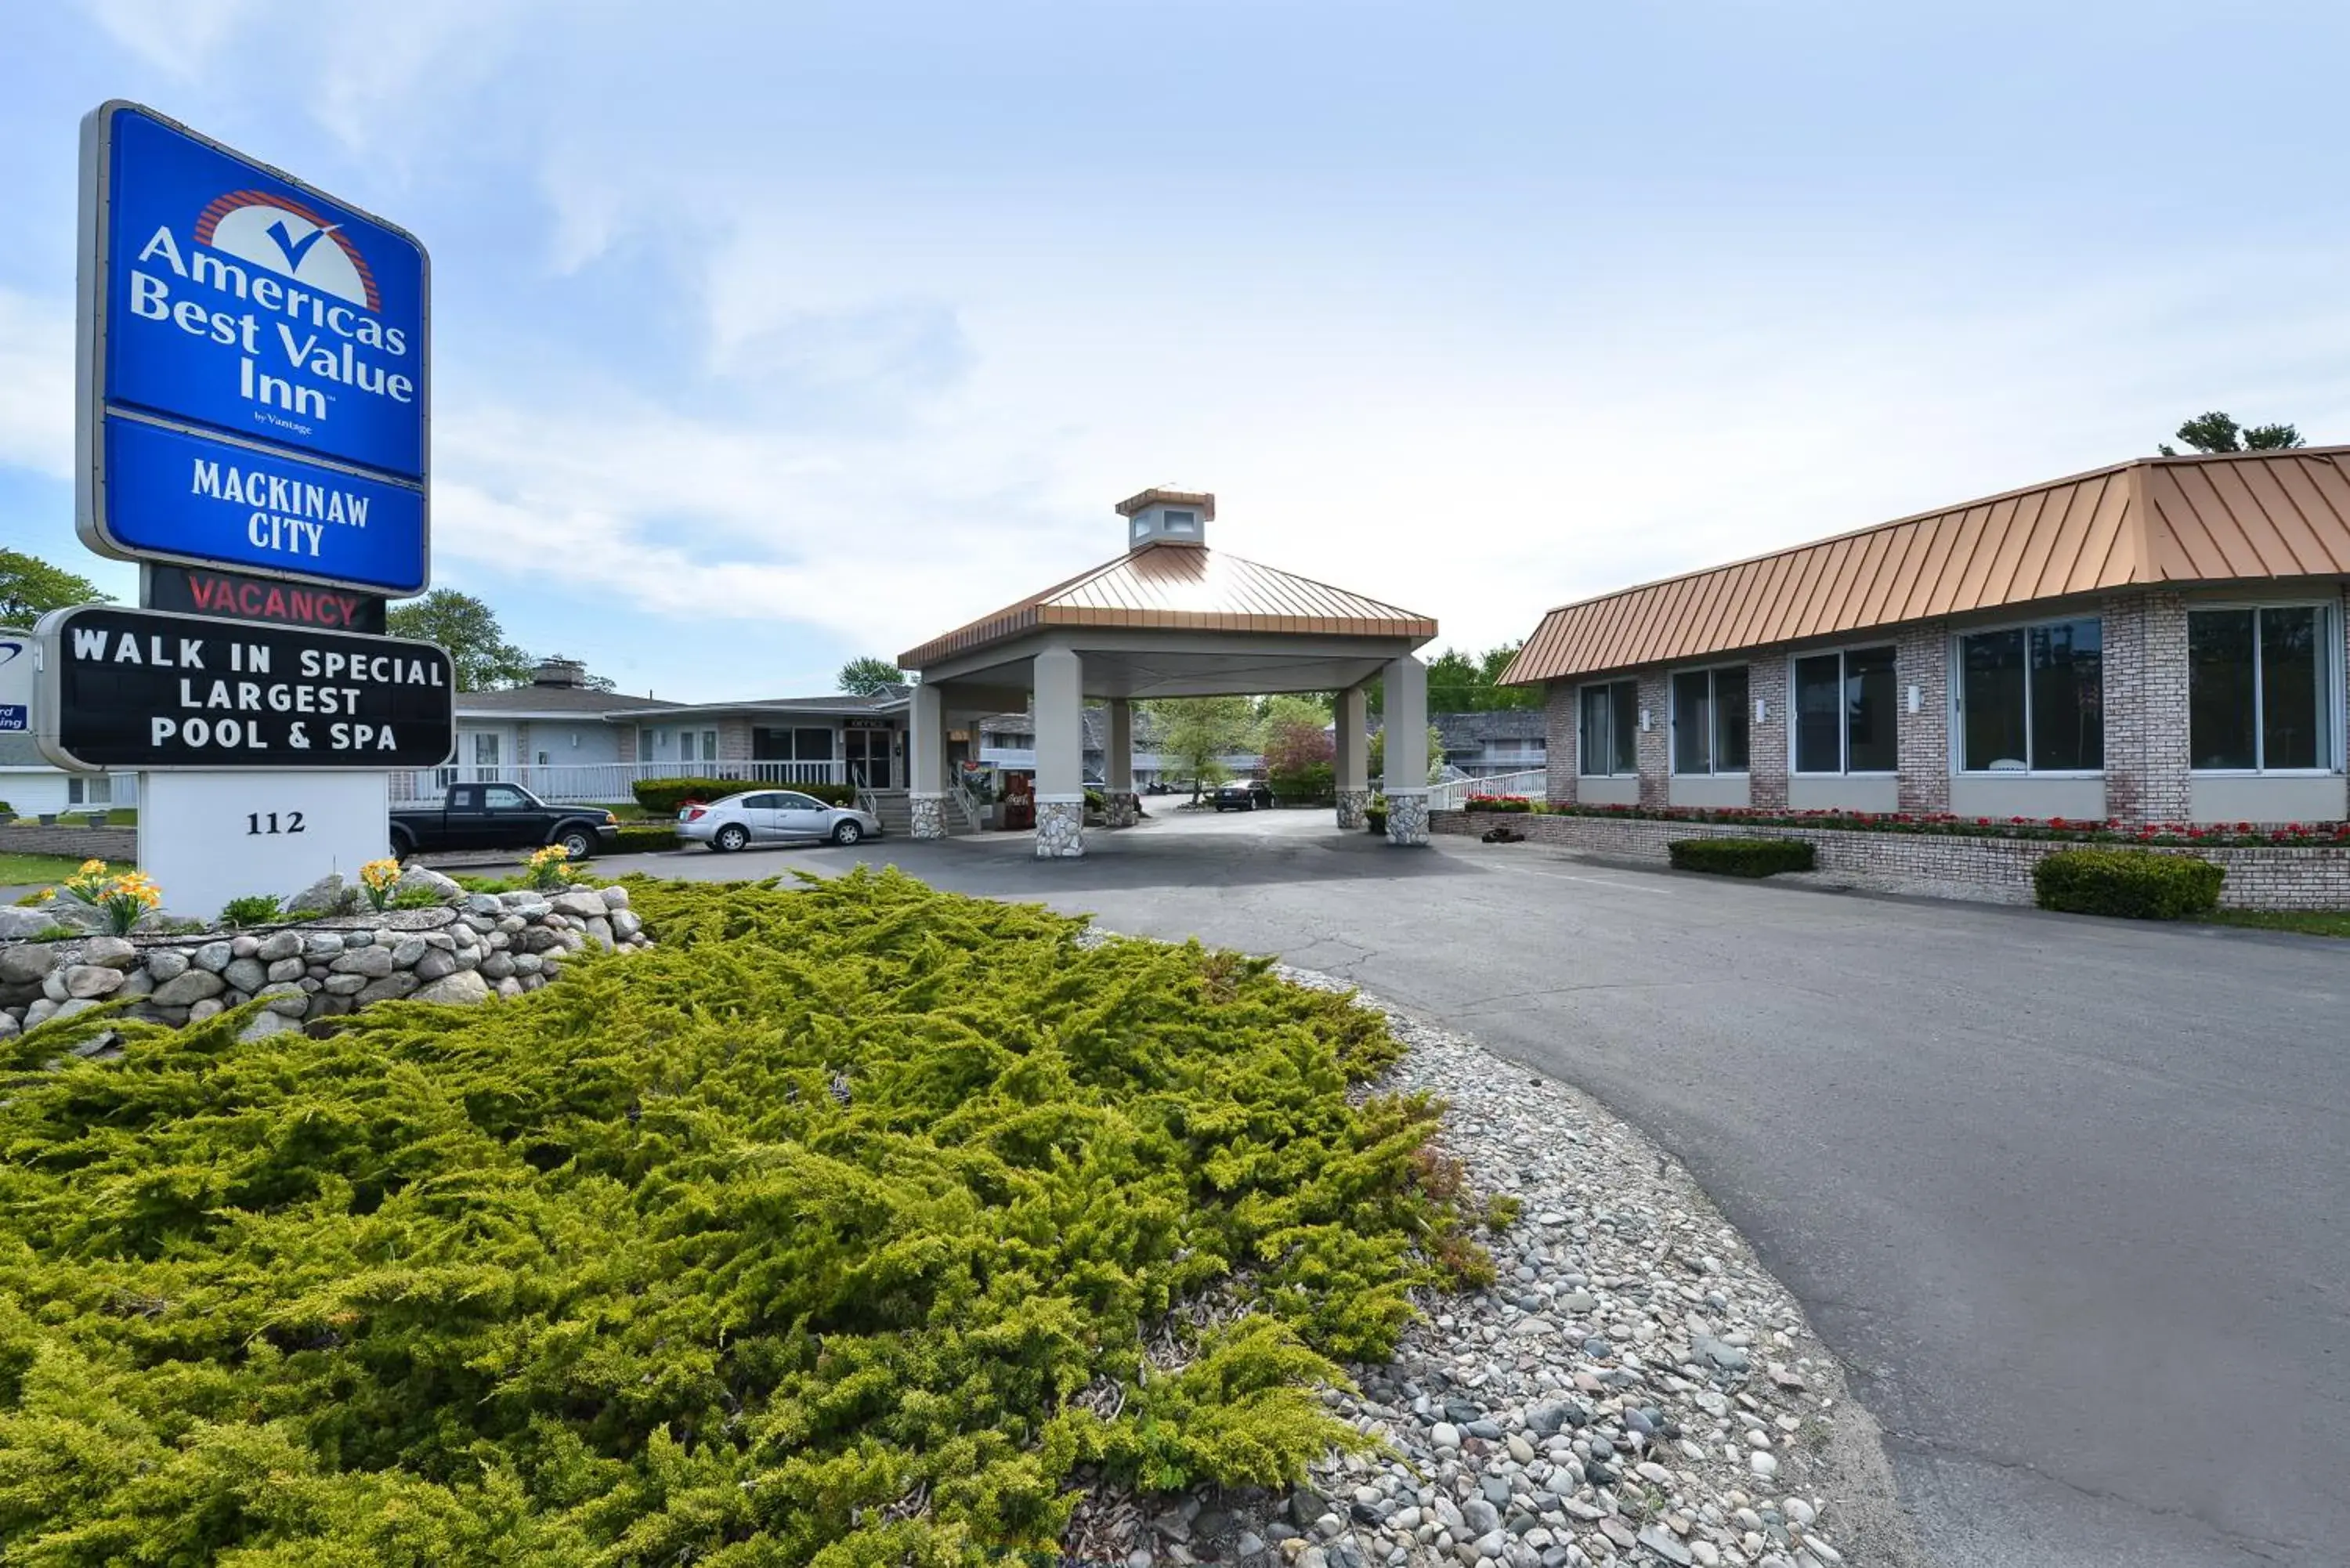 Facade/entrance, Property Building in Americas Best Value Inn Mackinaw City